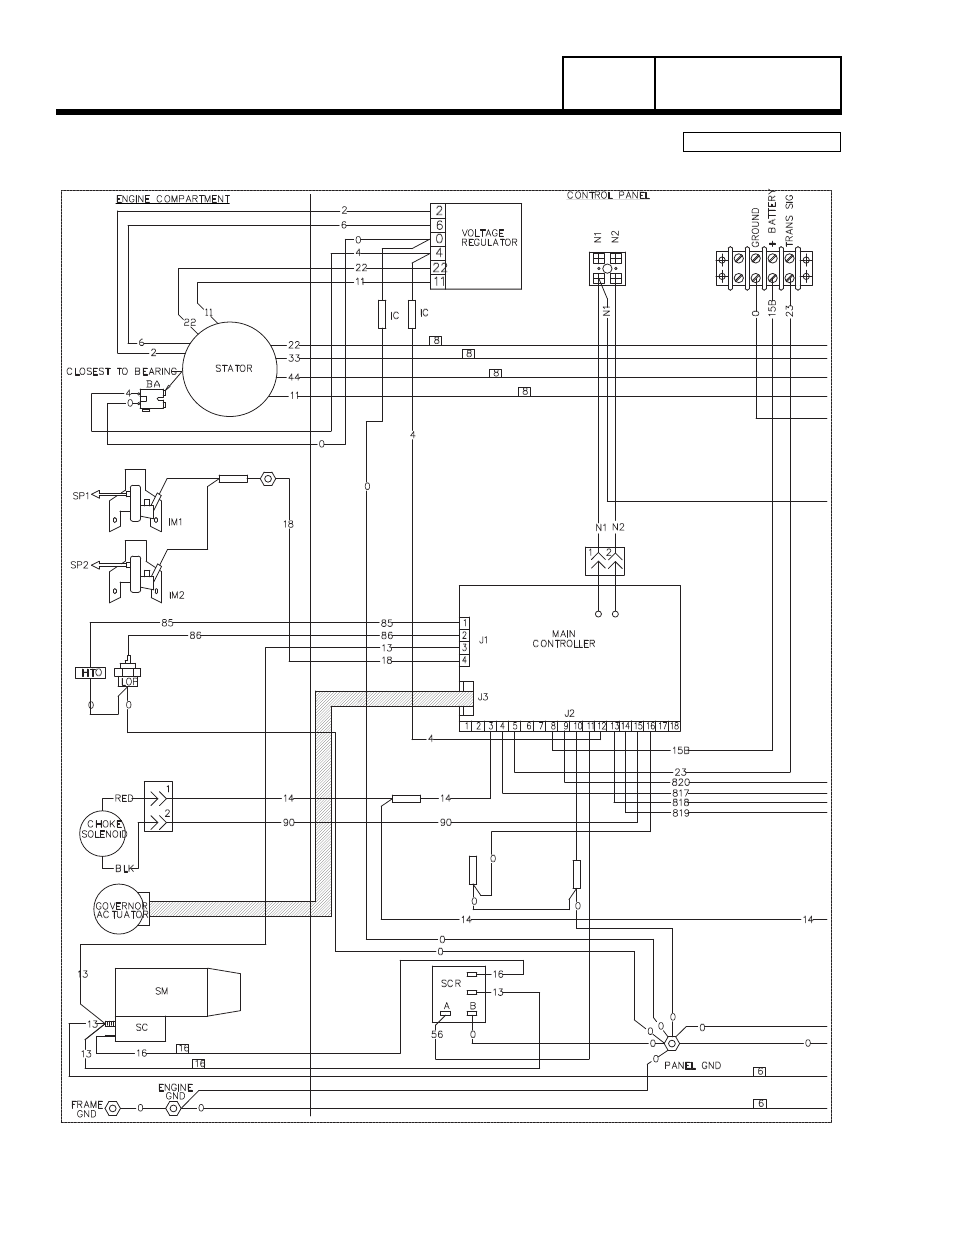 Wiring diagram, 20 kw home standby, Group g, Part 7 | Page 180, Wiring - diagram | Generac Power Systems 8 kW LP User Manual | Page 182 / 192